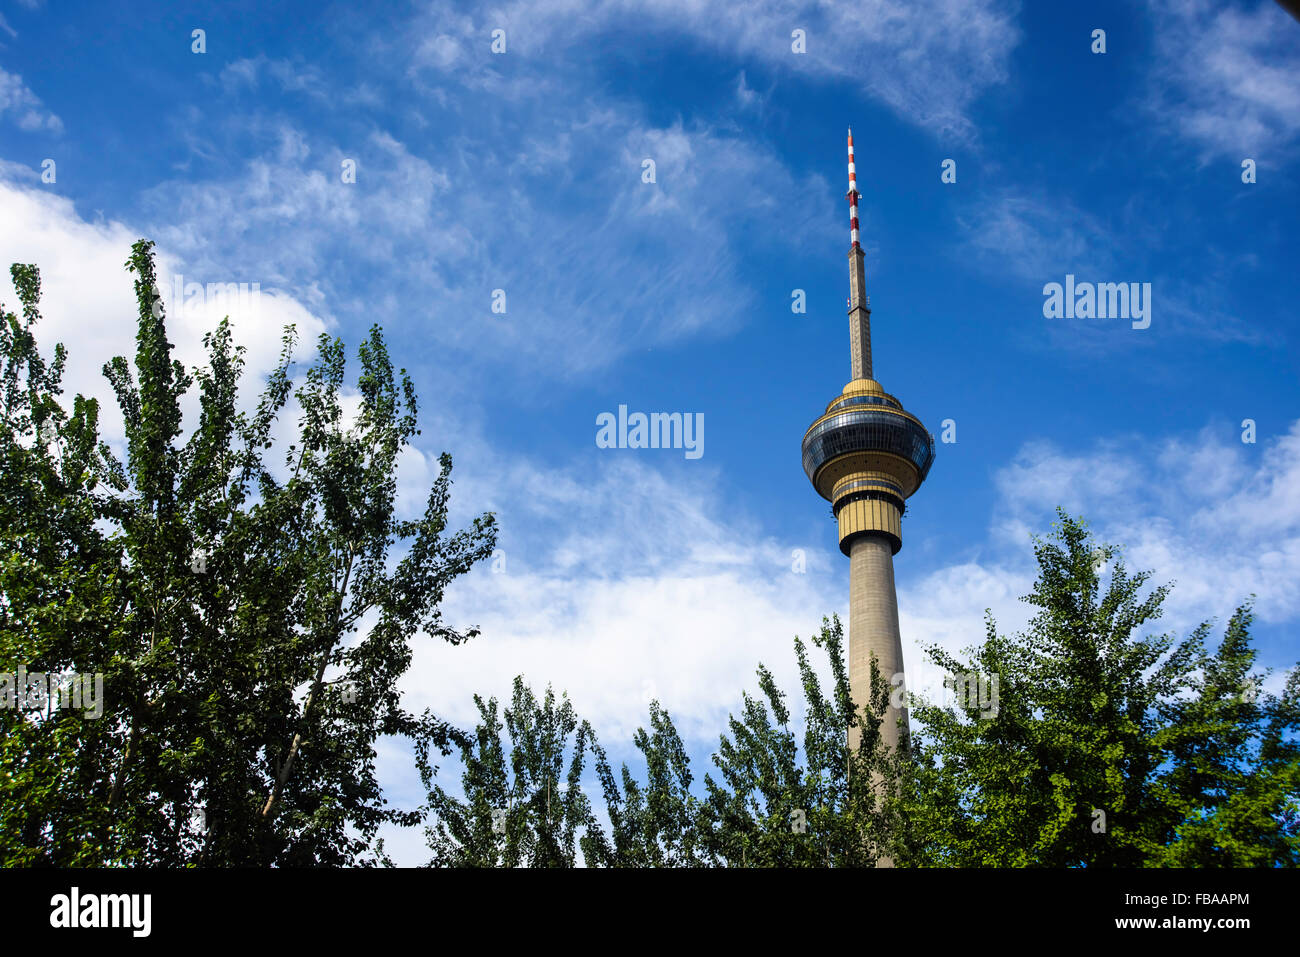 The CCTV Tower, China Central Television tower , Beijing, China.and it's the tallest structure in beijing. Stock Photo